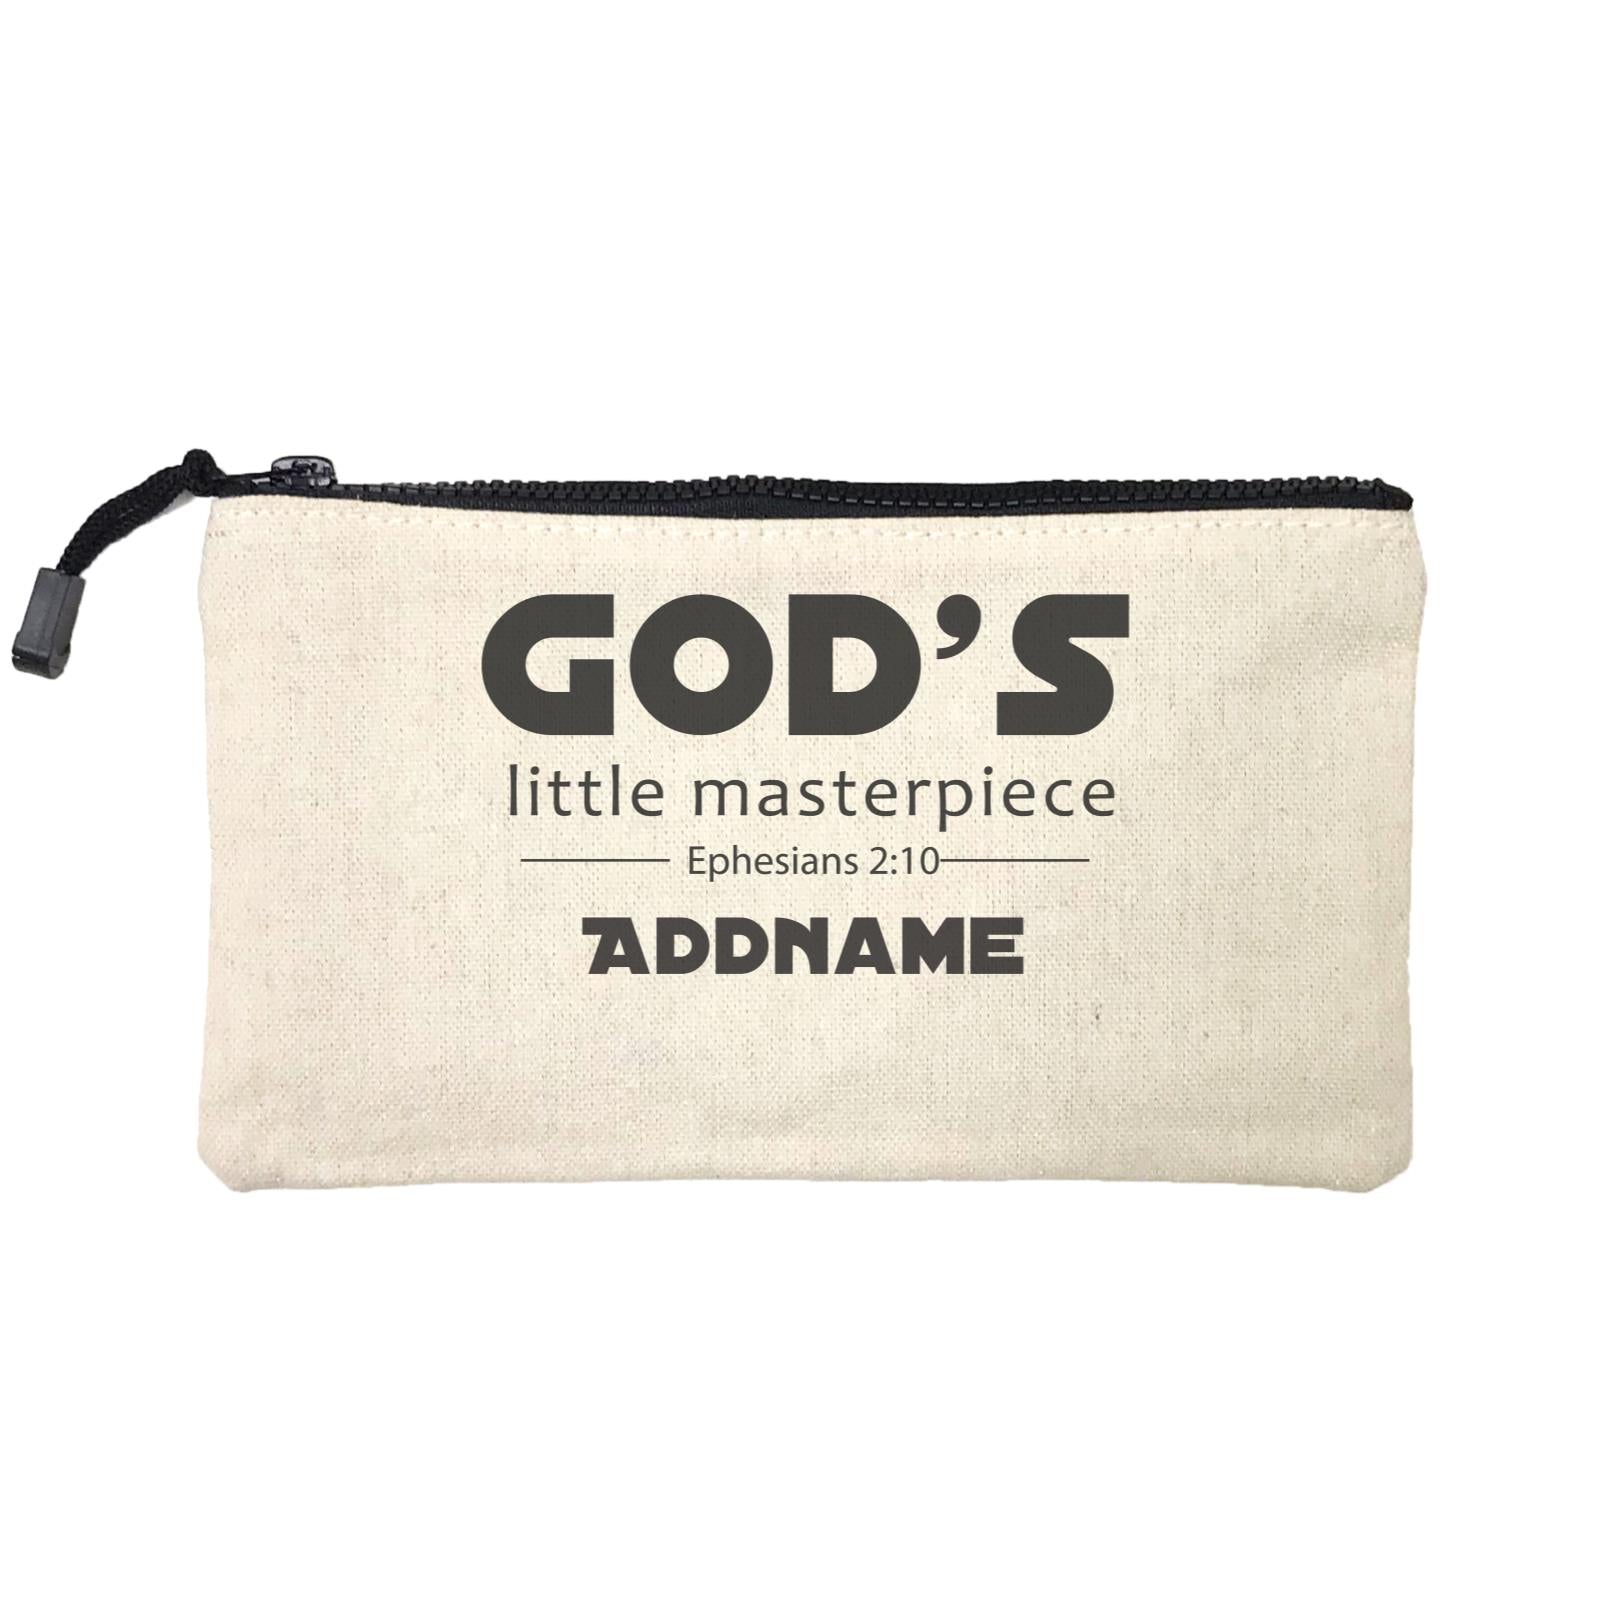 Christian Baby God's Little Masterpiece Ephesians 2.10 Addname Mini Accessories Stationery Pouch